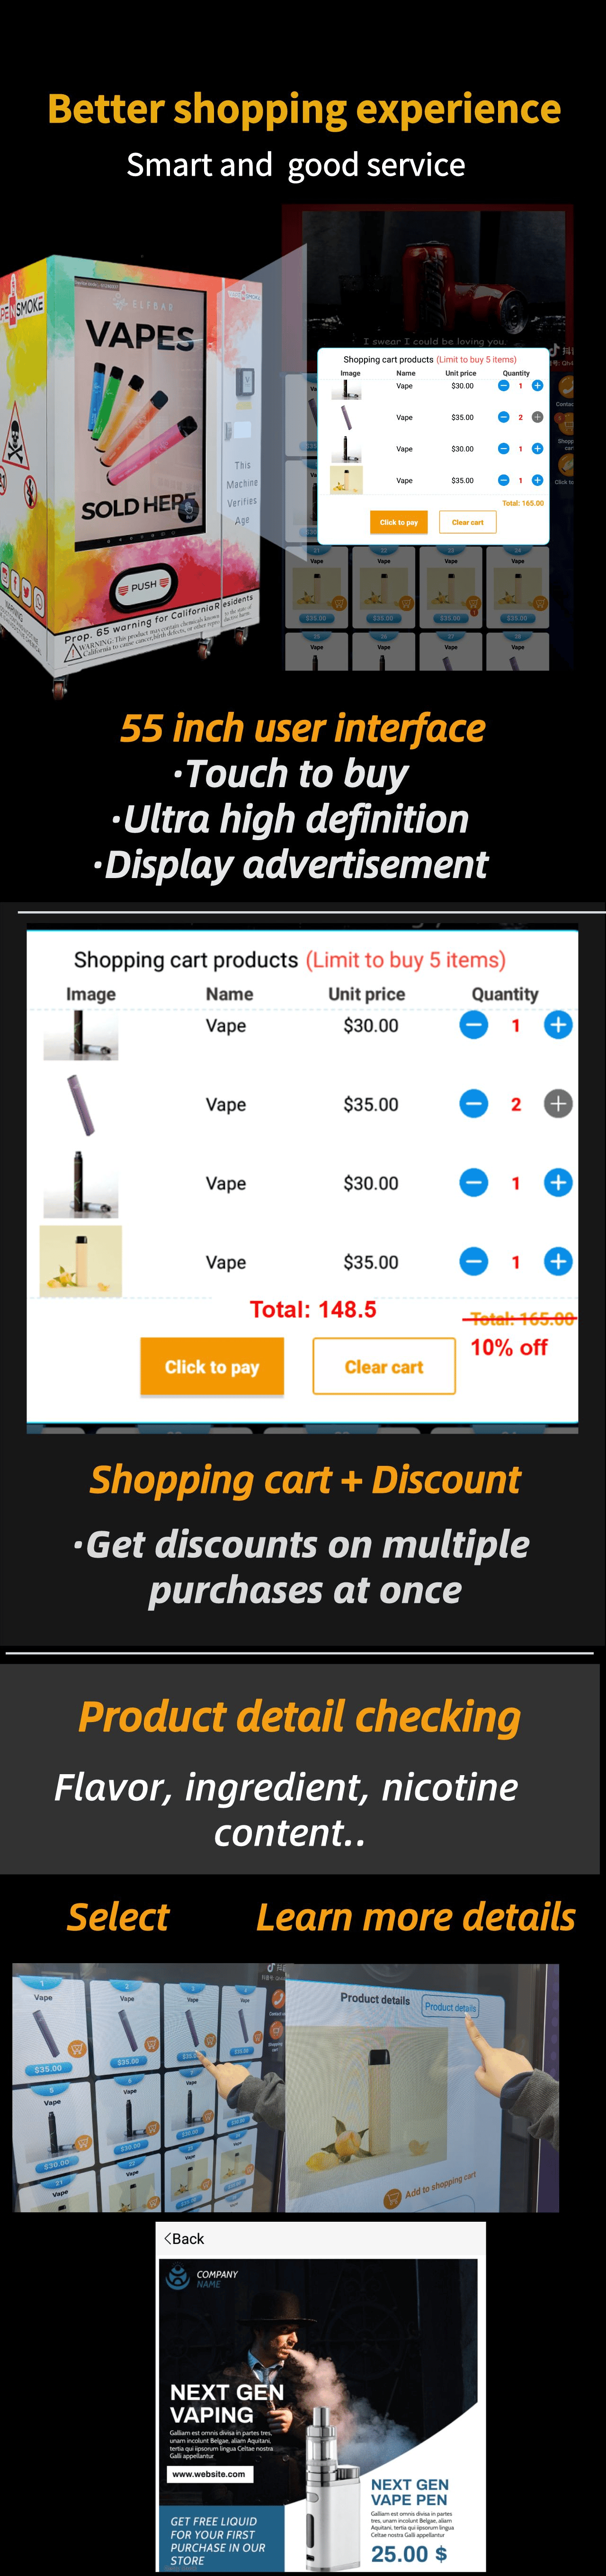 Micron smart e-cigarette vape vending machine, it offer better shopping experience to customer, it has 55 inch touch screen that can display advertisement, when customer select products on the screen, they can add products to shopping cart, and get 10% off price